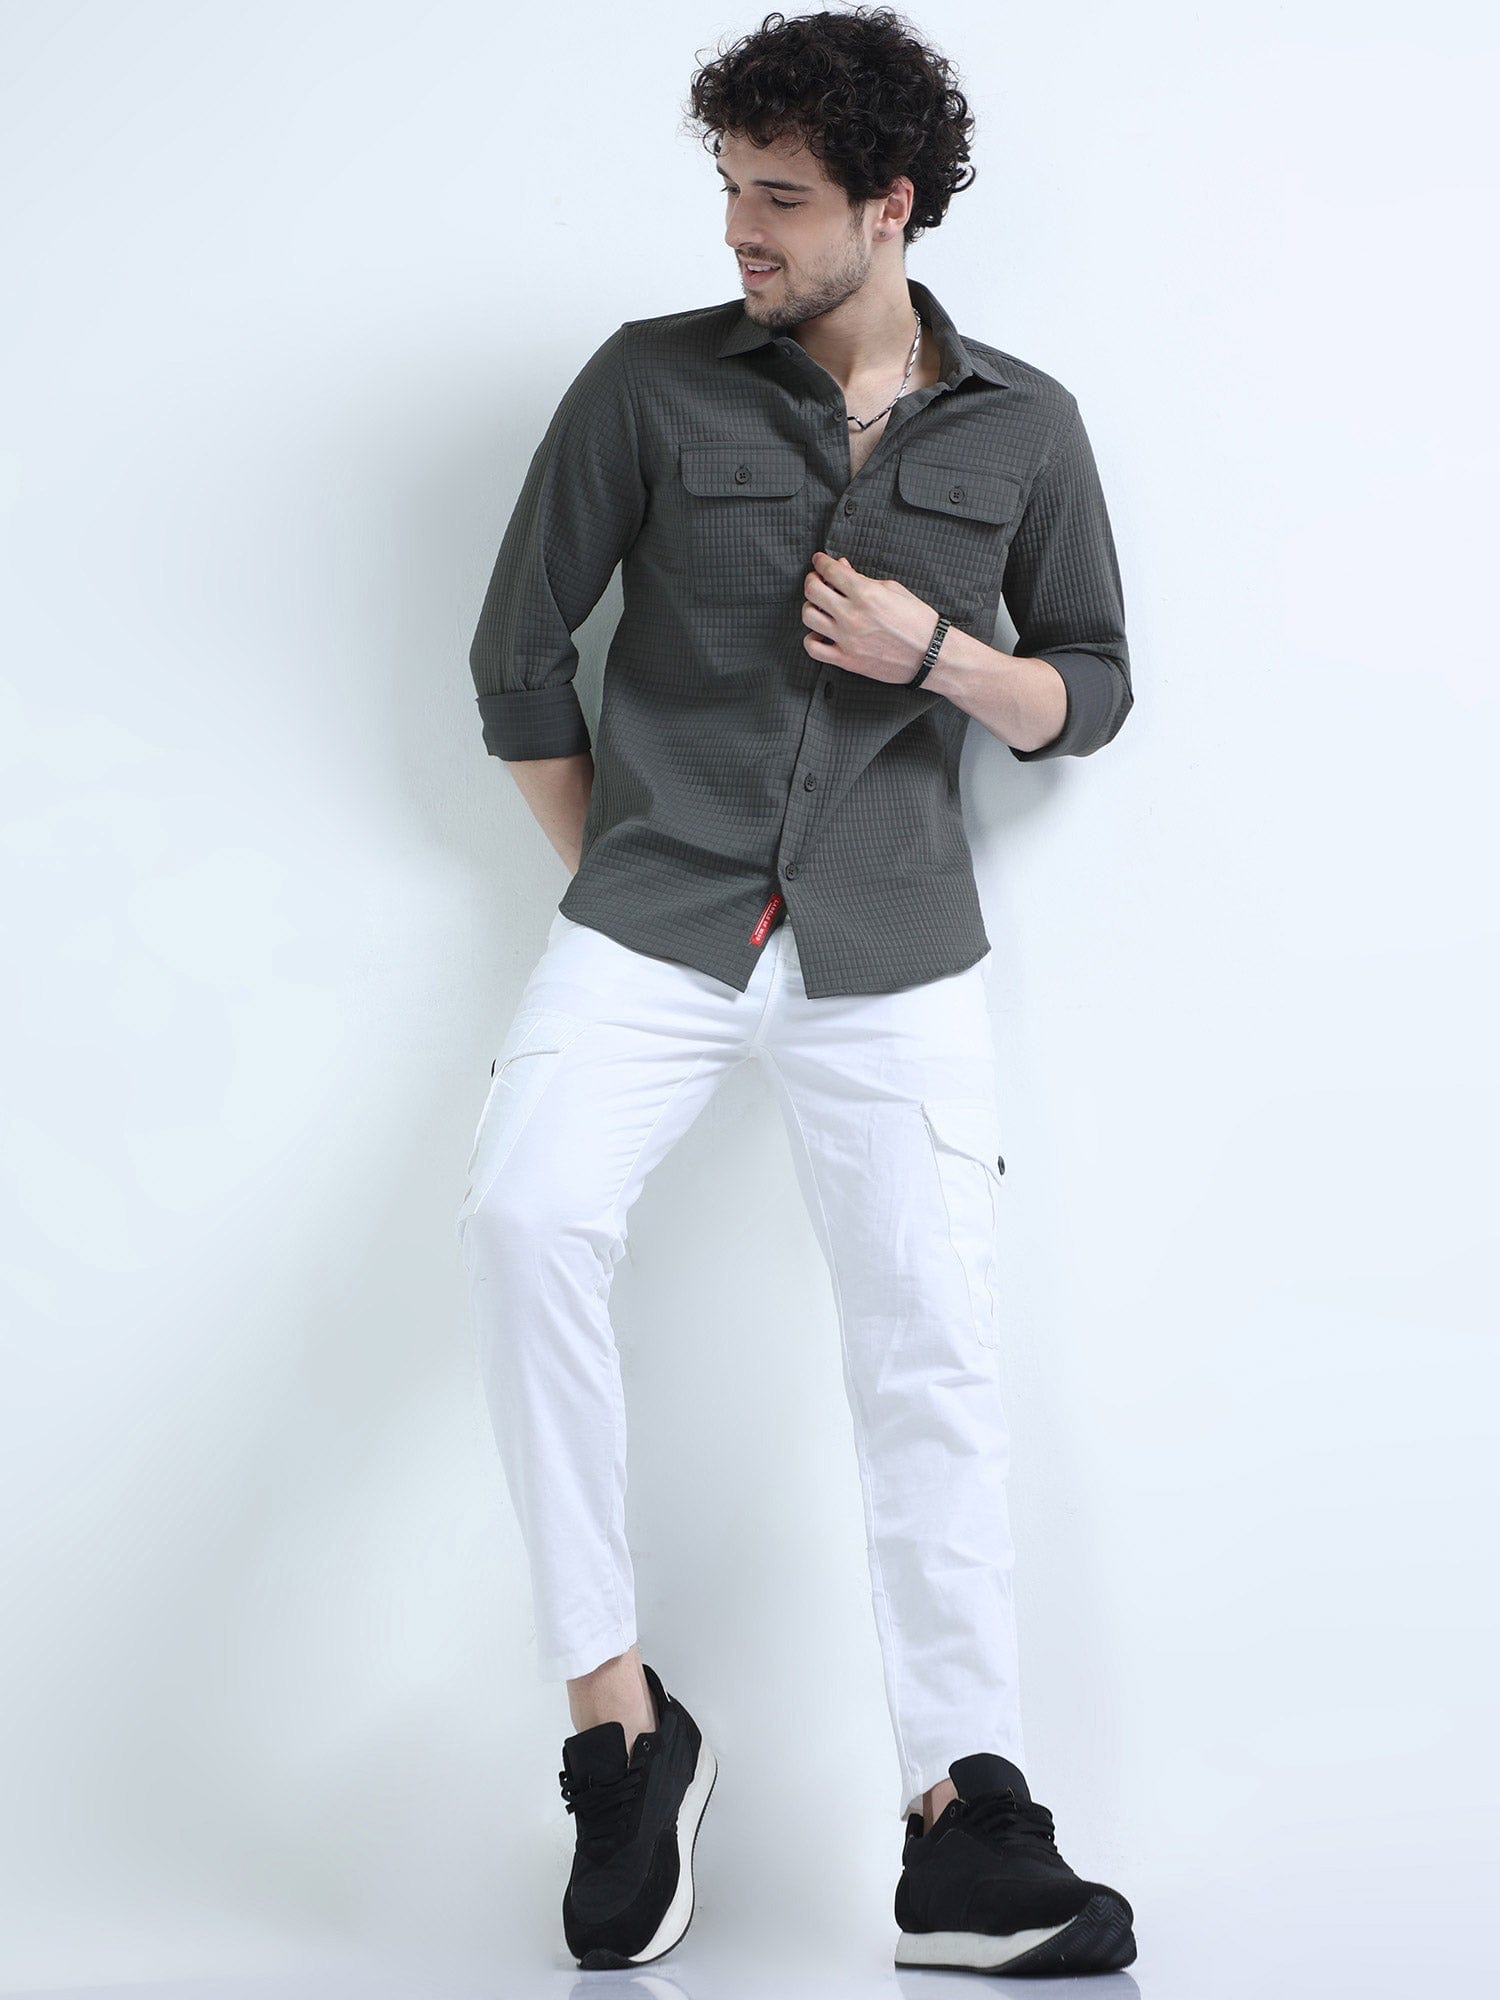 Buy Latest Solid Plain Grey Shirt For Men OnlineRs. 1349.00